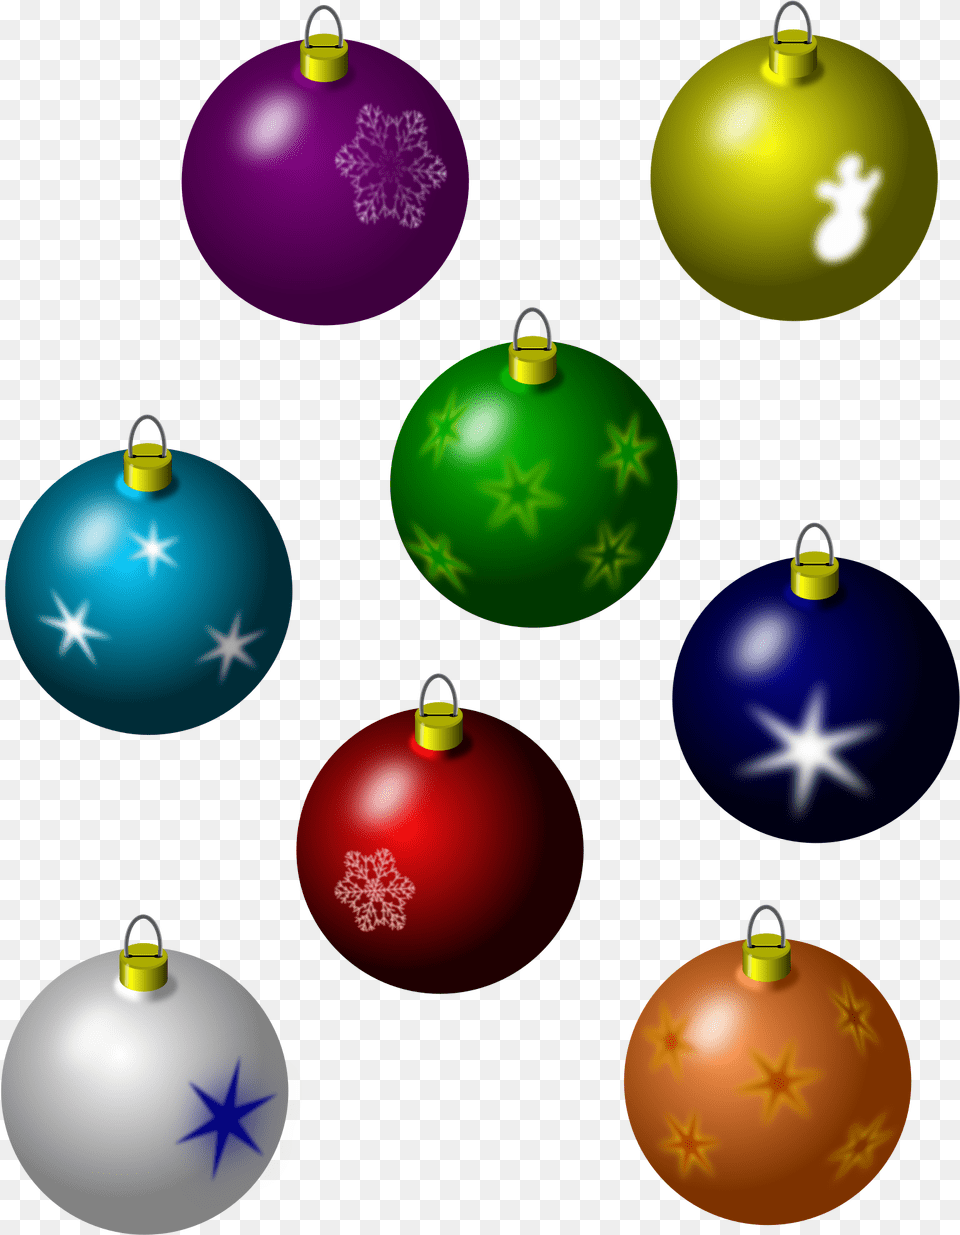 Spherechristmas Ornamentball Christmas Bulbs, Accessories, Sphere, Lighting, Ornament Free Png Download